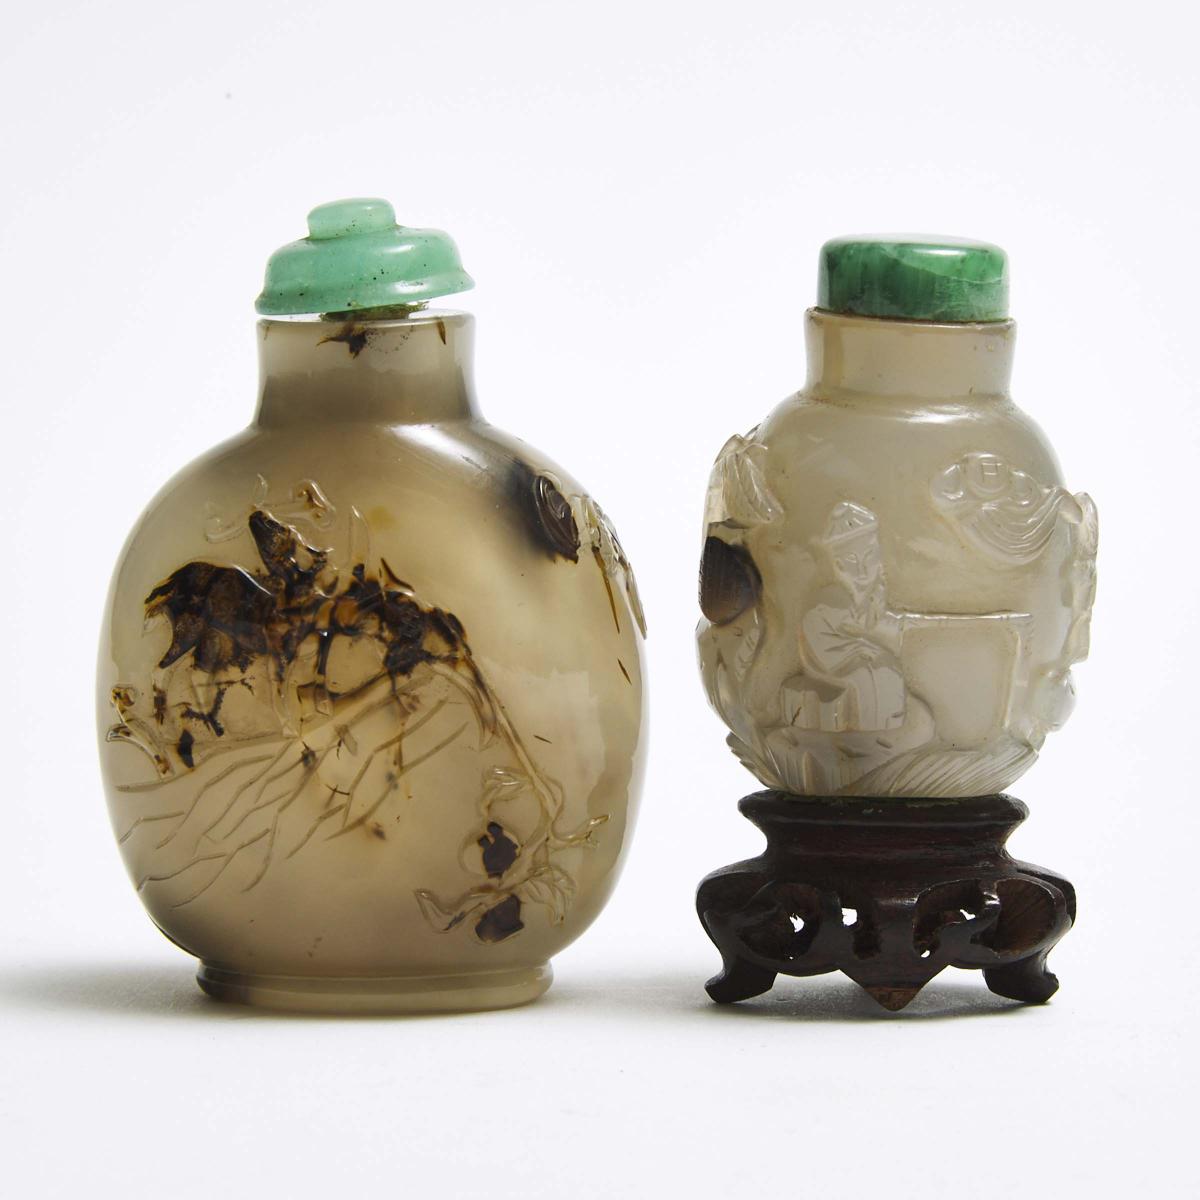 Two Well-Carved Agate Snuff Bottles, Qing Dynasty, 清 玛瑙巧雕鼻烟壶两只, tallest height 3 in — 7.5 cm (2 Piec - Image 2 of 4